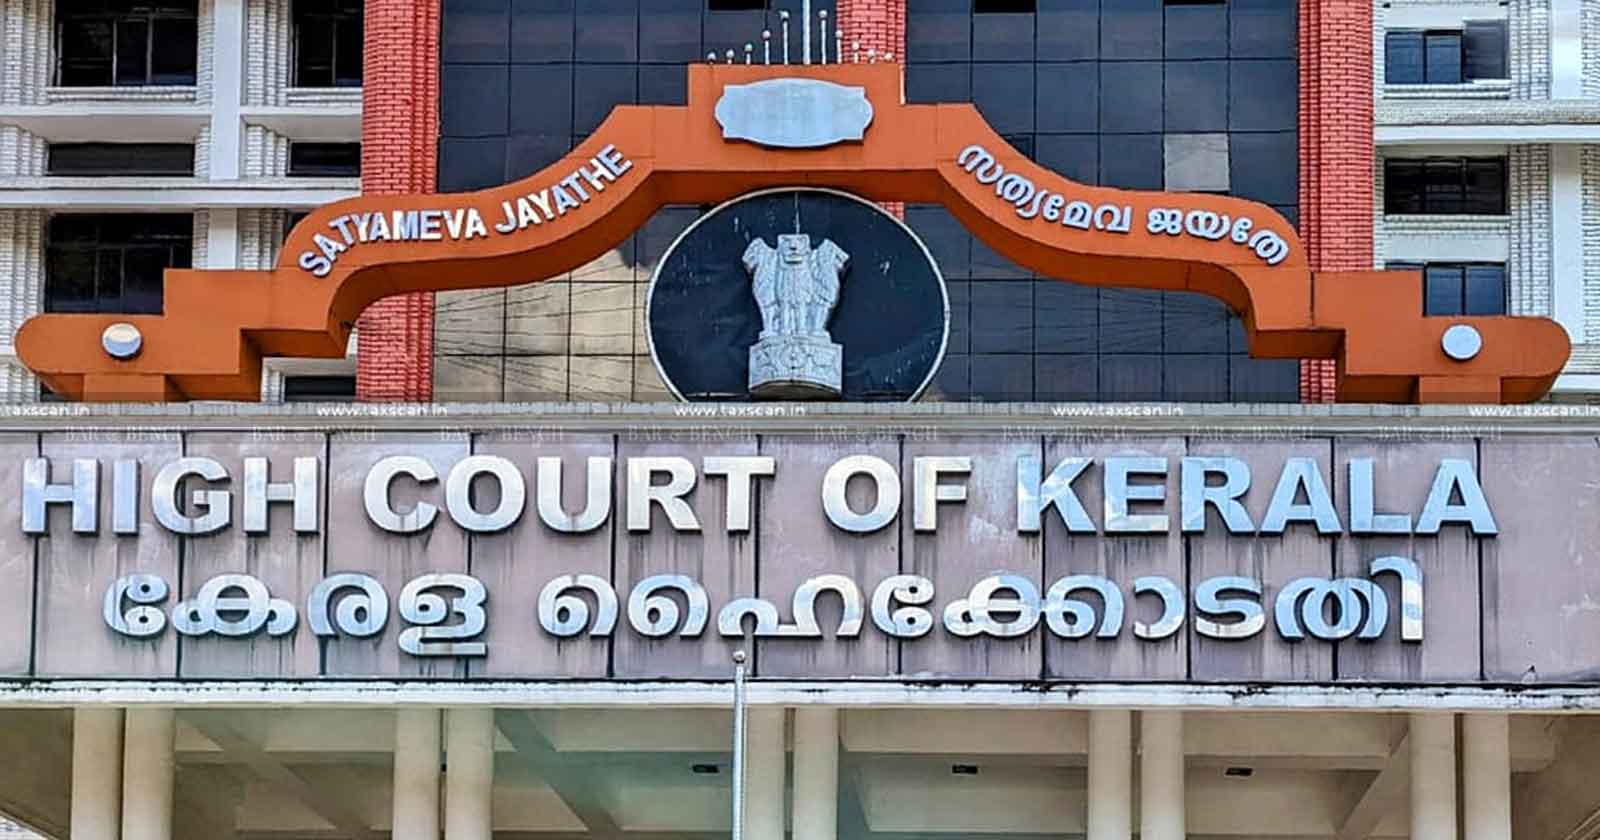 Non-Filing - ITR on Bonafide Belief - Exemption - Income Tax Act-Kerala HC directs - File ITR-TAXSCAN